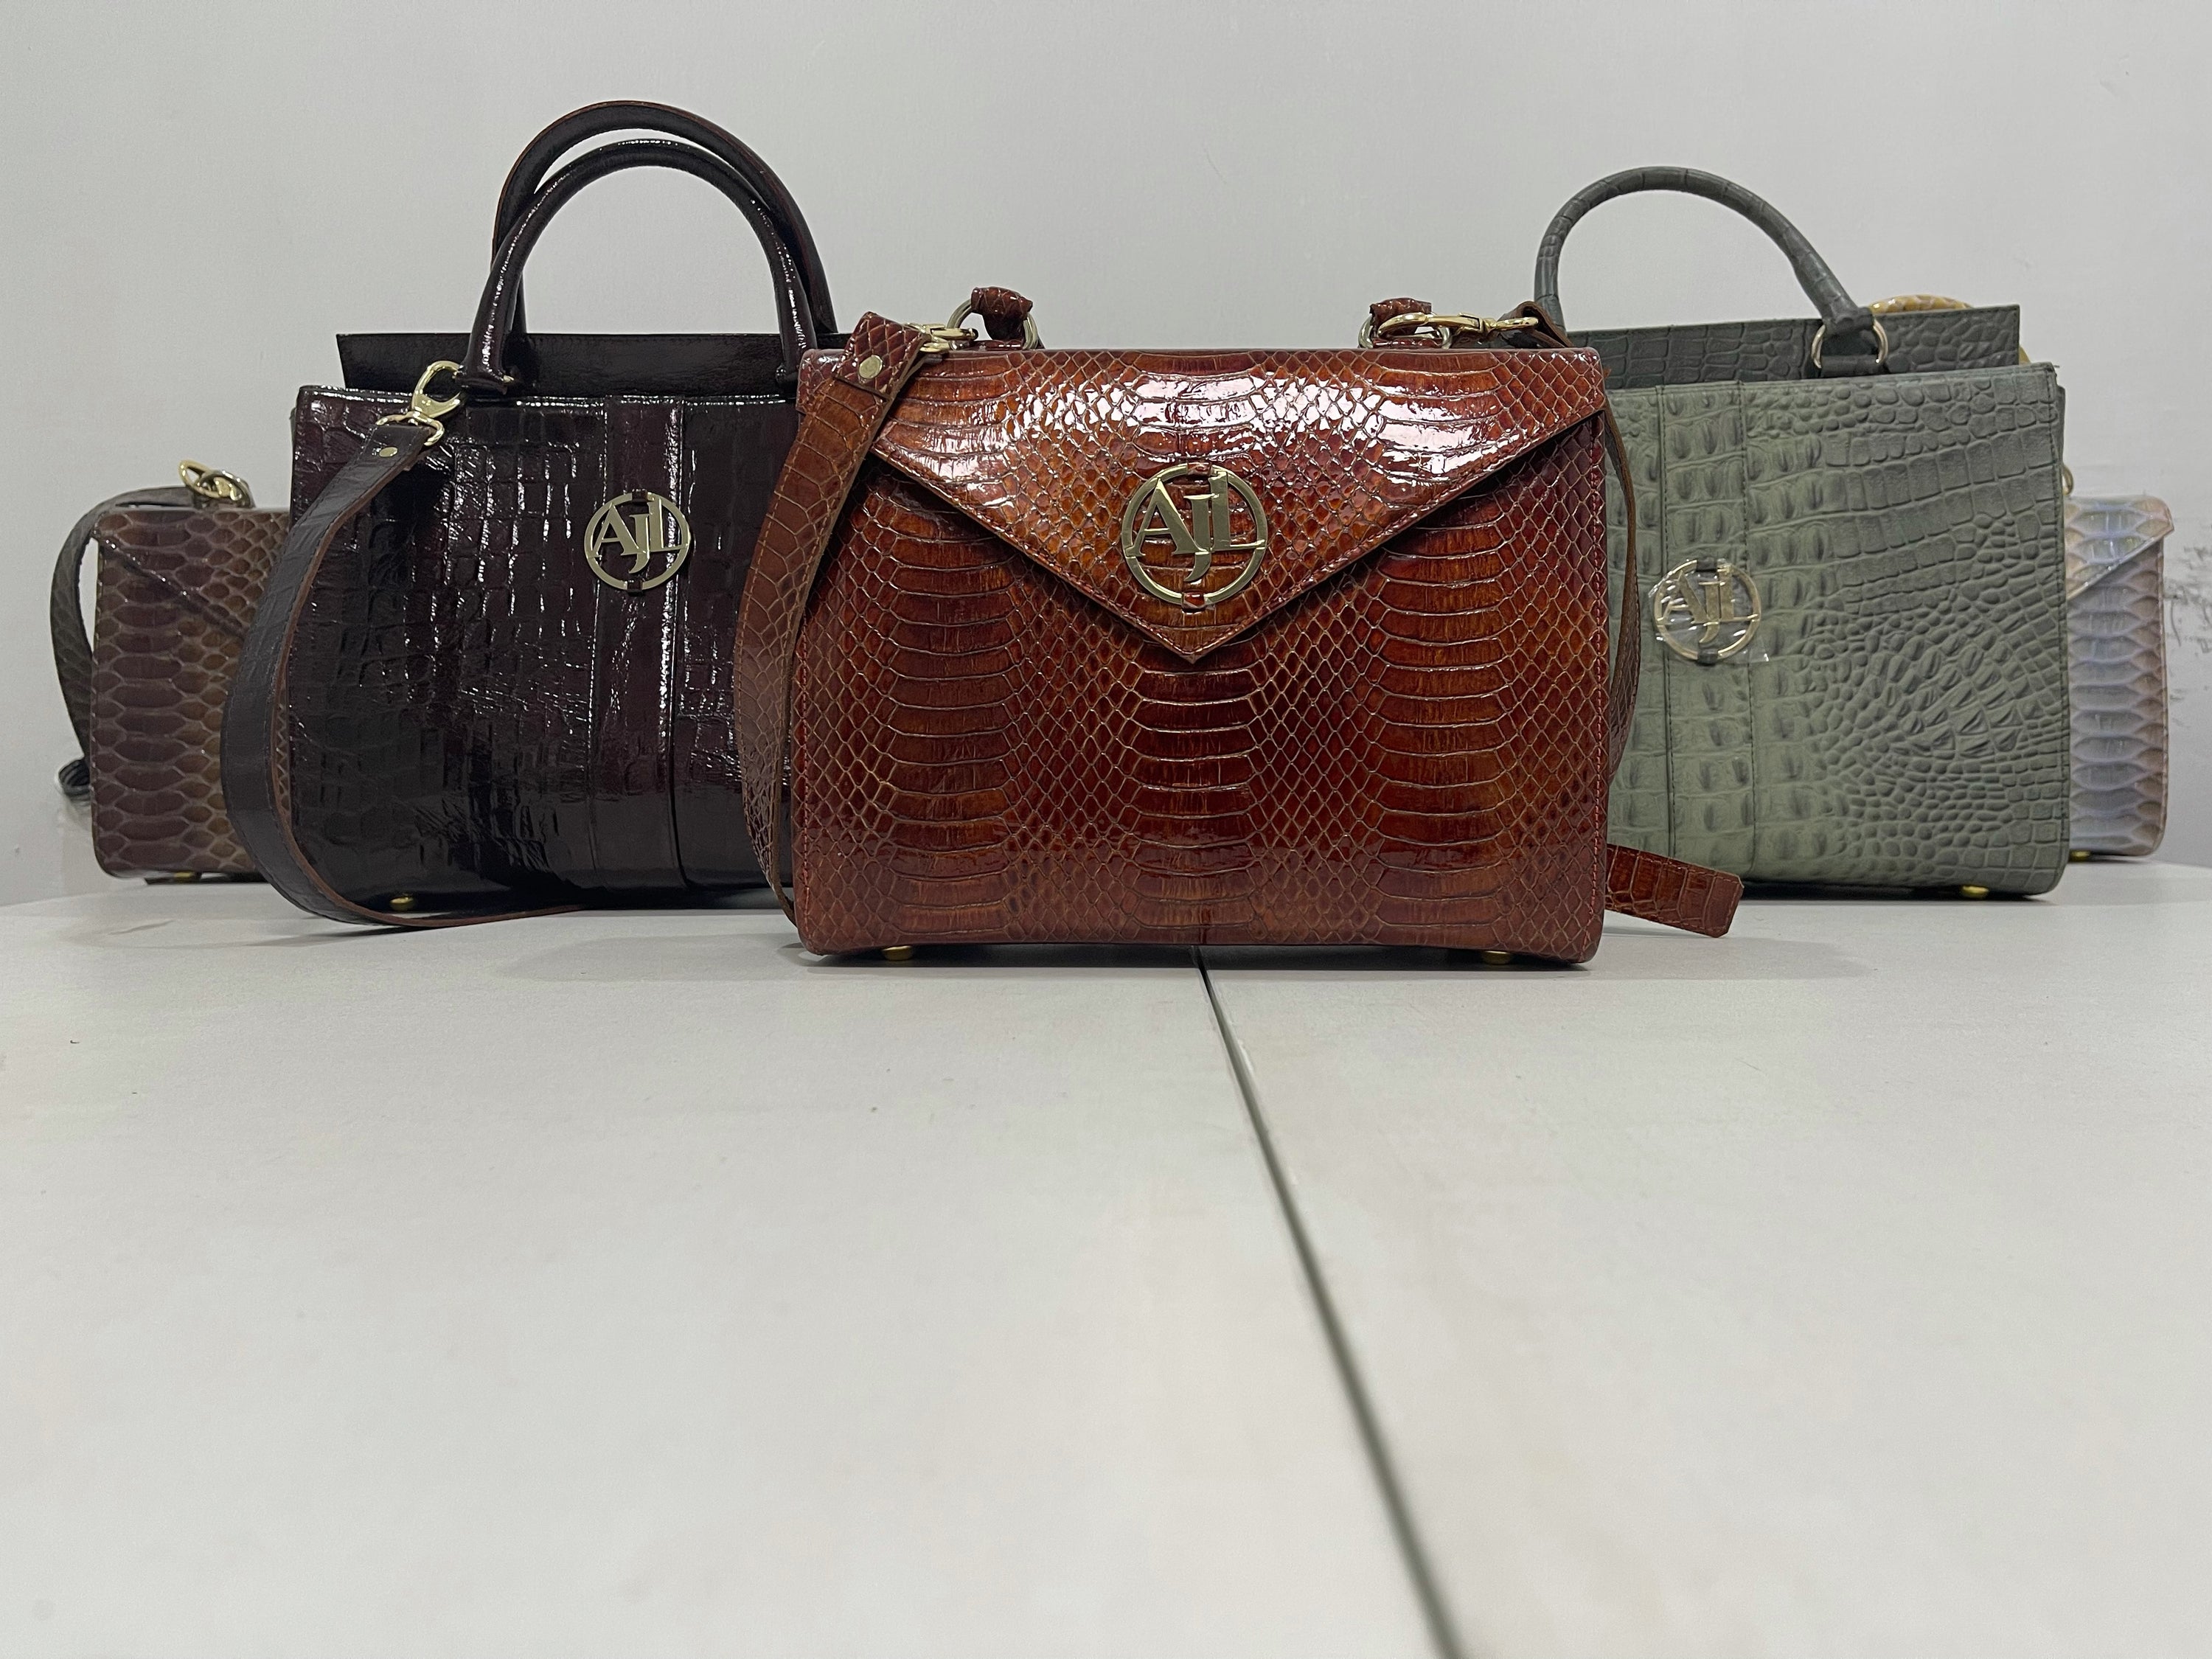 Load video: Our range of leather handbags can double as shoulder bags as well as tote bags. A classy leather work bag in a classic design for that chic look. With a welcome 10% discount,